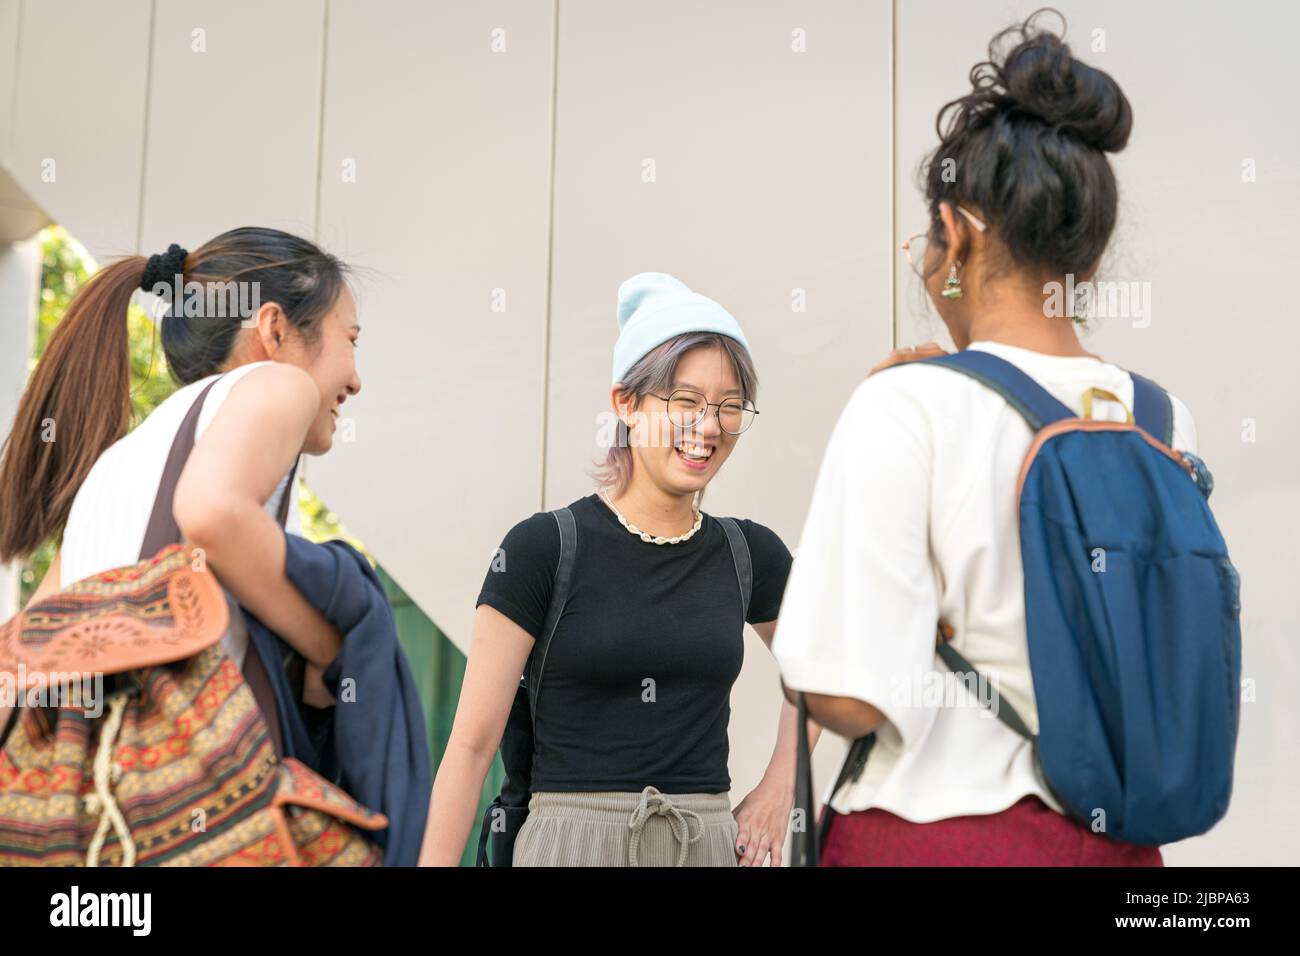 Group of young college multi-racial women students standing and laughing together. Stock Photo